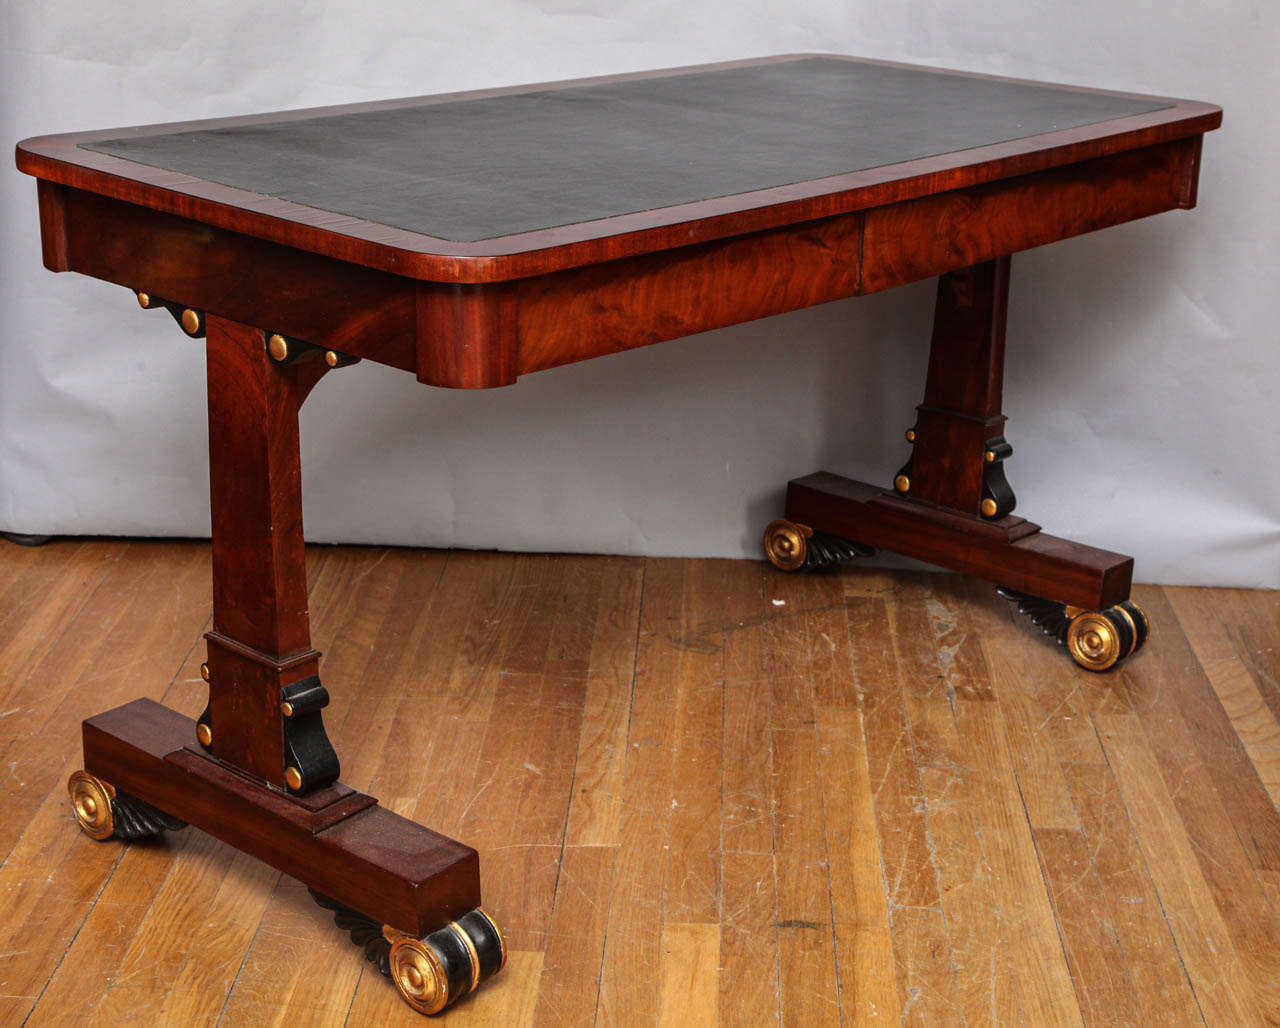 An English late Regency sofa table/desk with vertical supports having ebonized and gilt details. The top finished on four sides, and having two drawers in apron on one side and false drawers on the opposite side. The surface with inset leather top